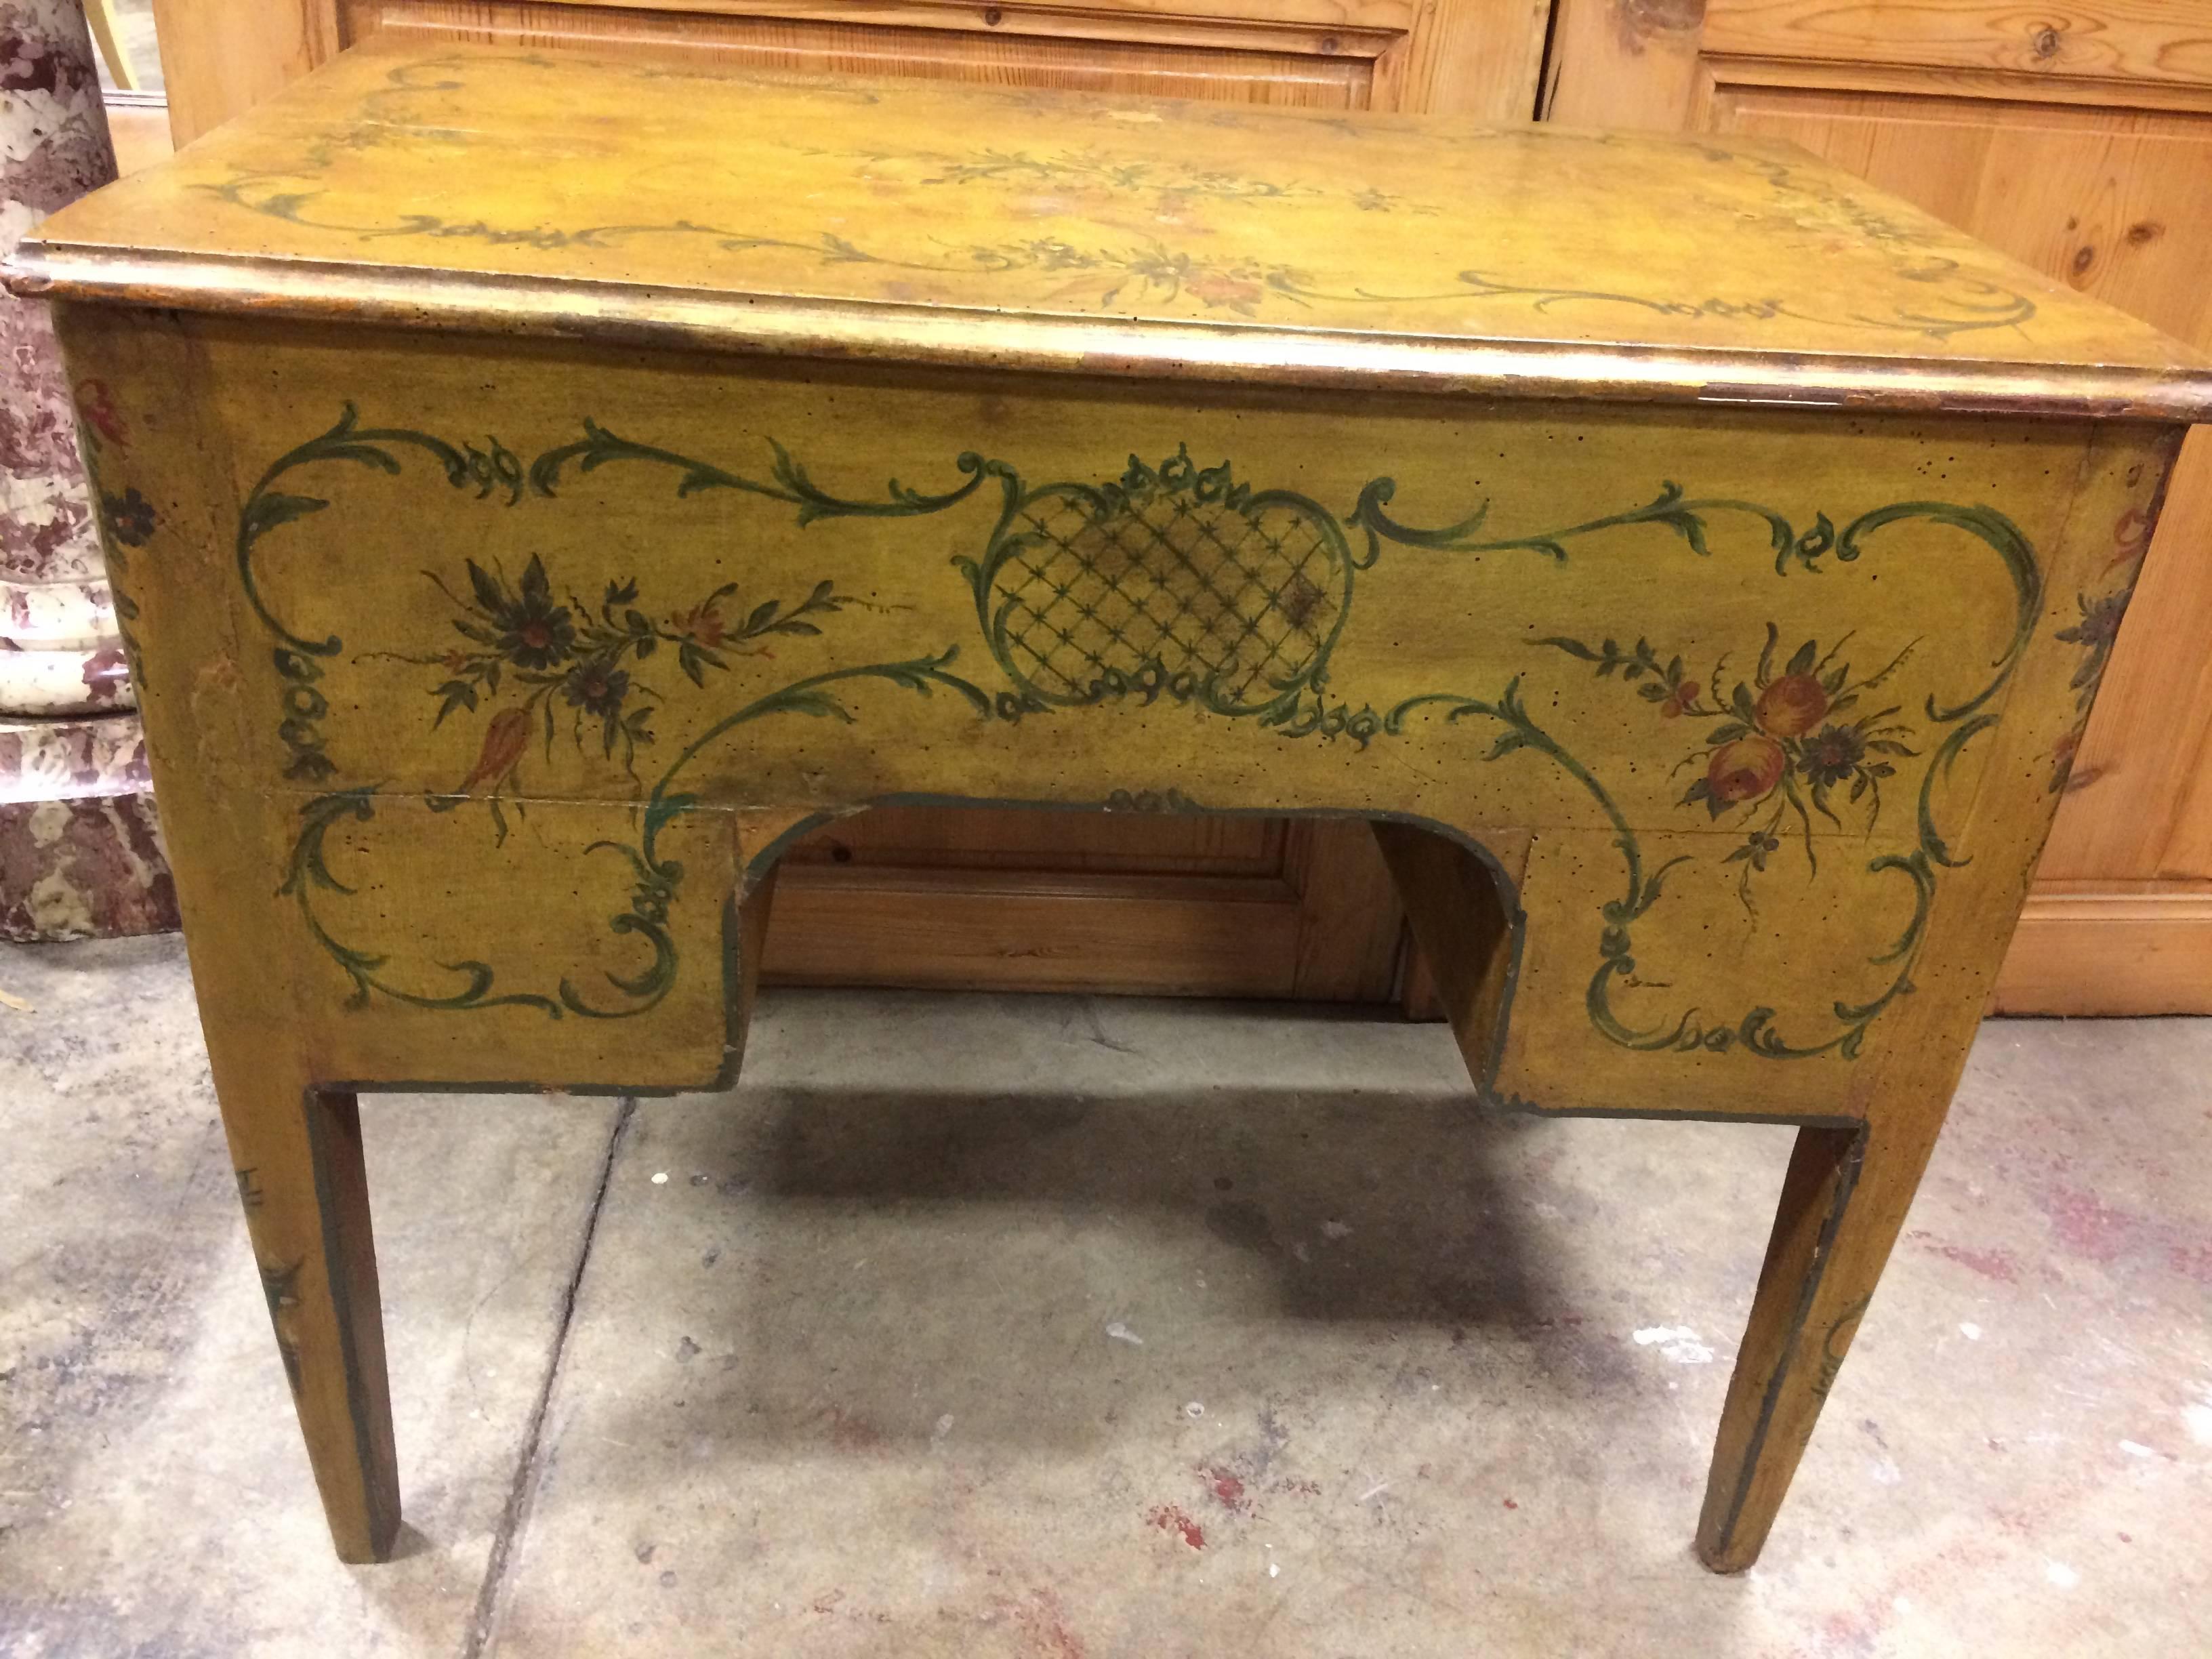 Polychromed Dressing Table Side Table 18th Century Venetian with Brushing Side